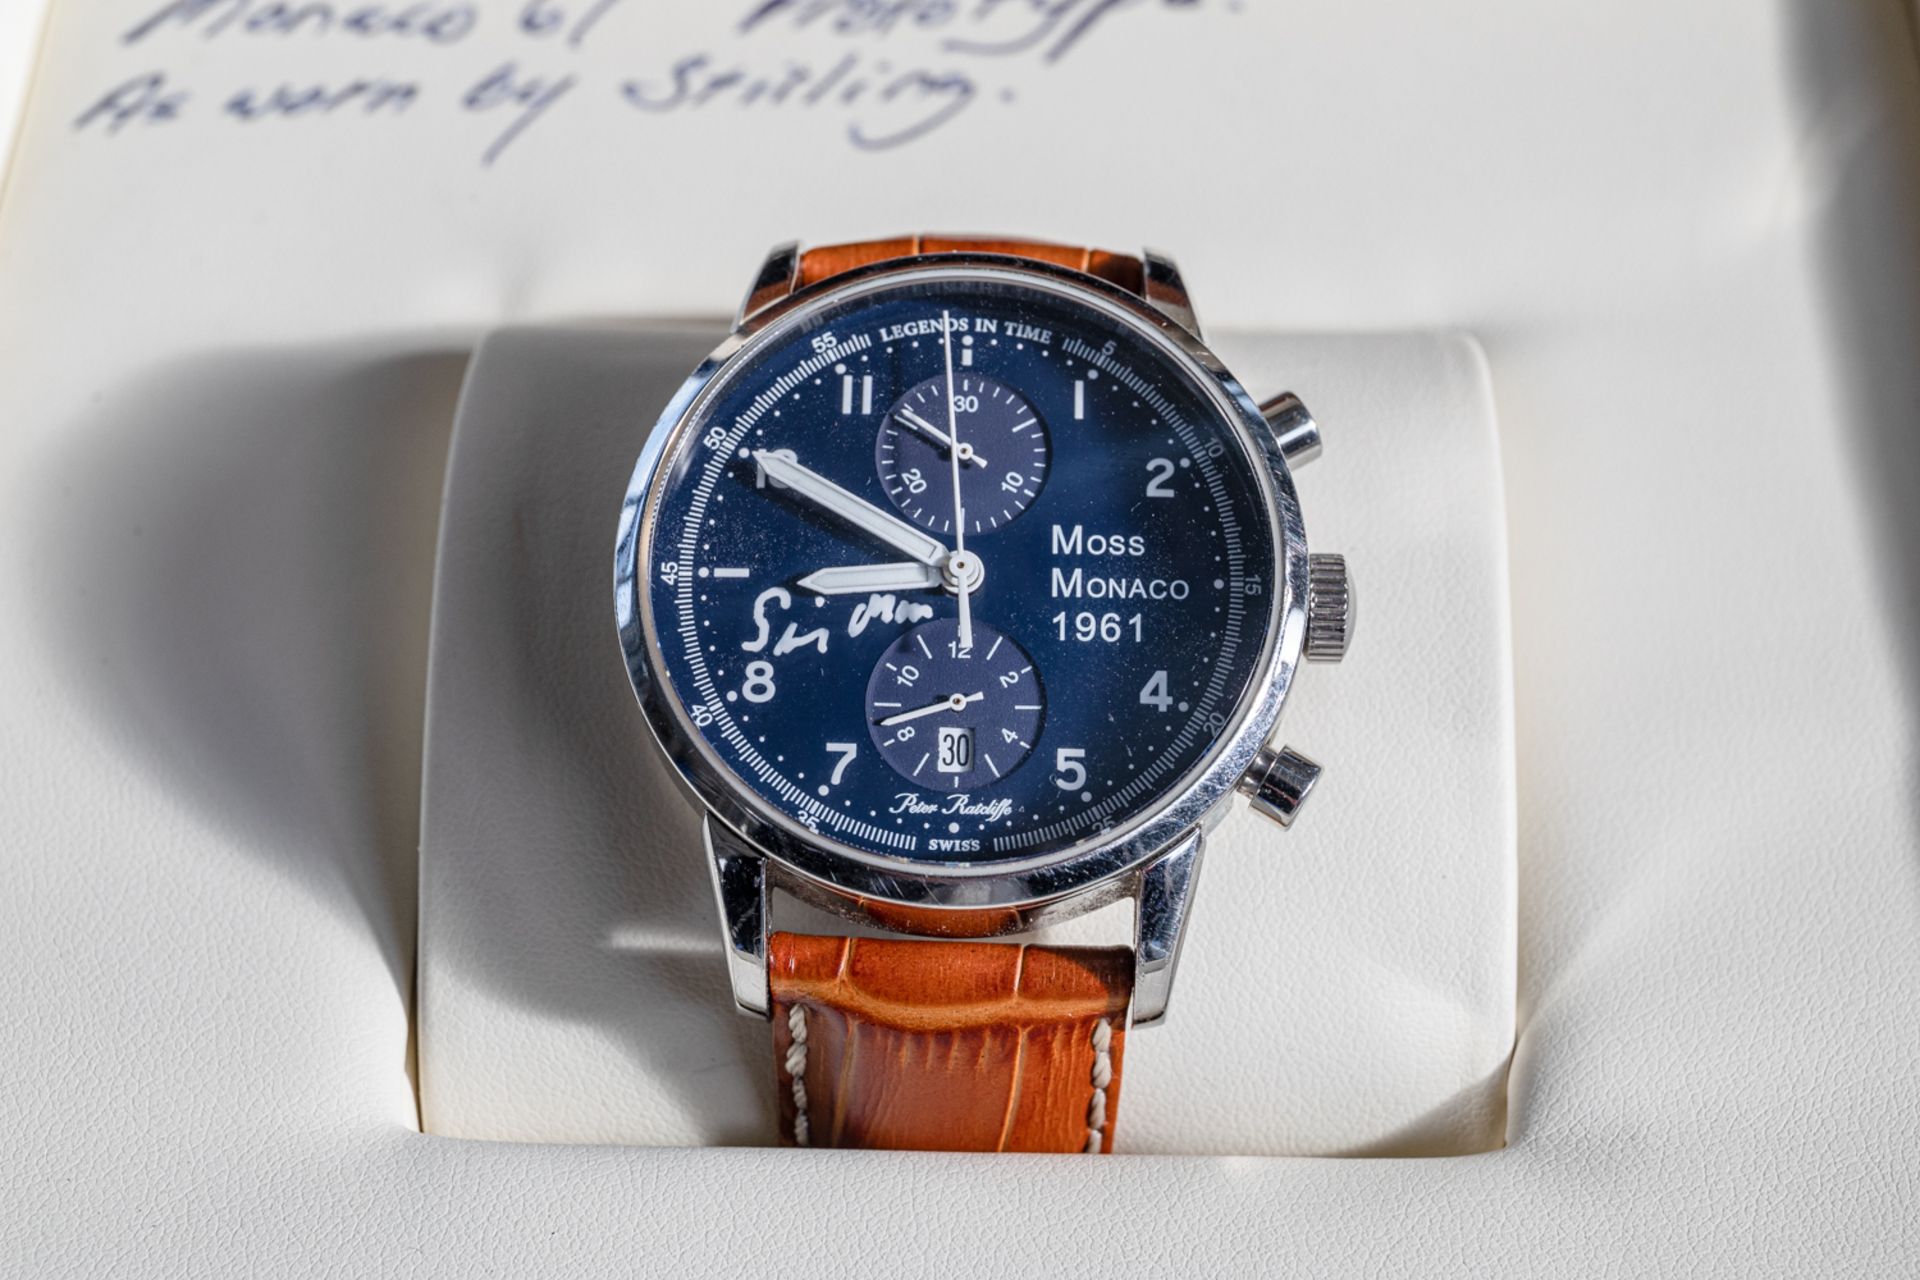 Wrist watch Formerly the property of Stirling Moss